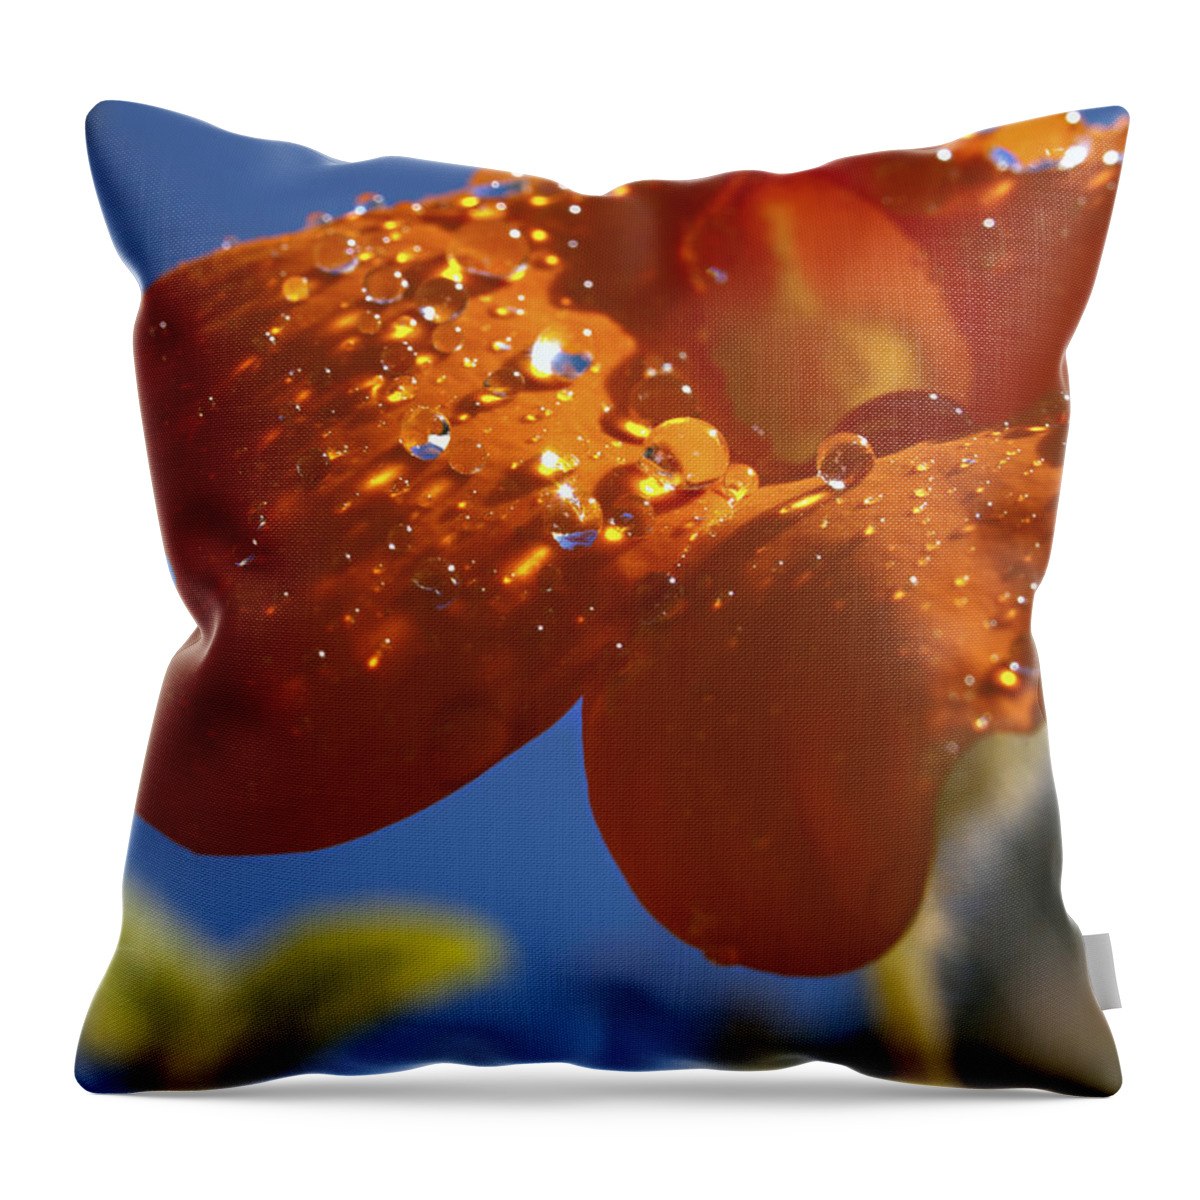 Clockvine Throw Pillow featuring the photograph So What Rhymes with Orange Anyway by Joe Schofield